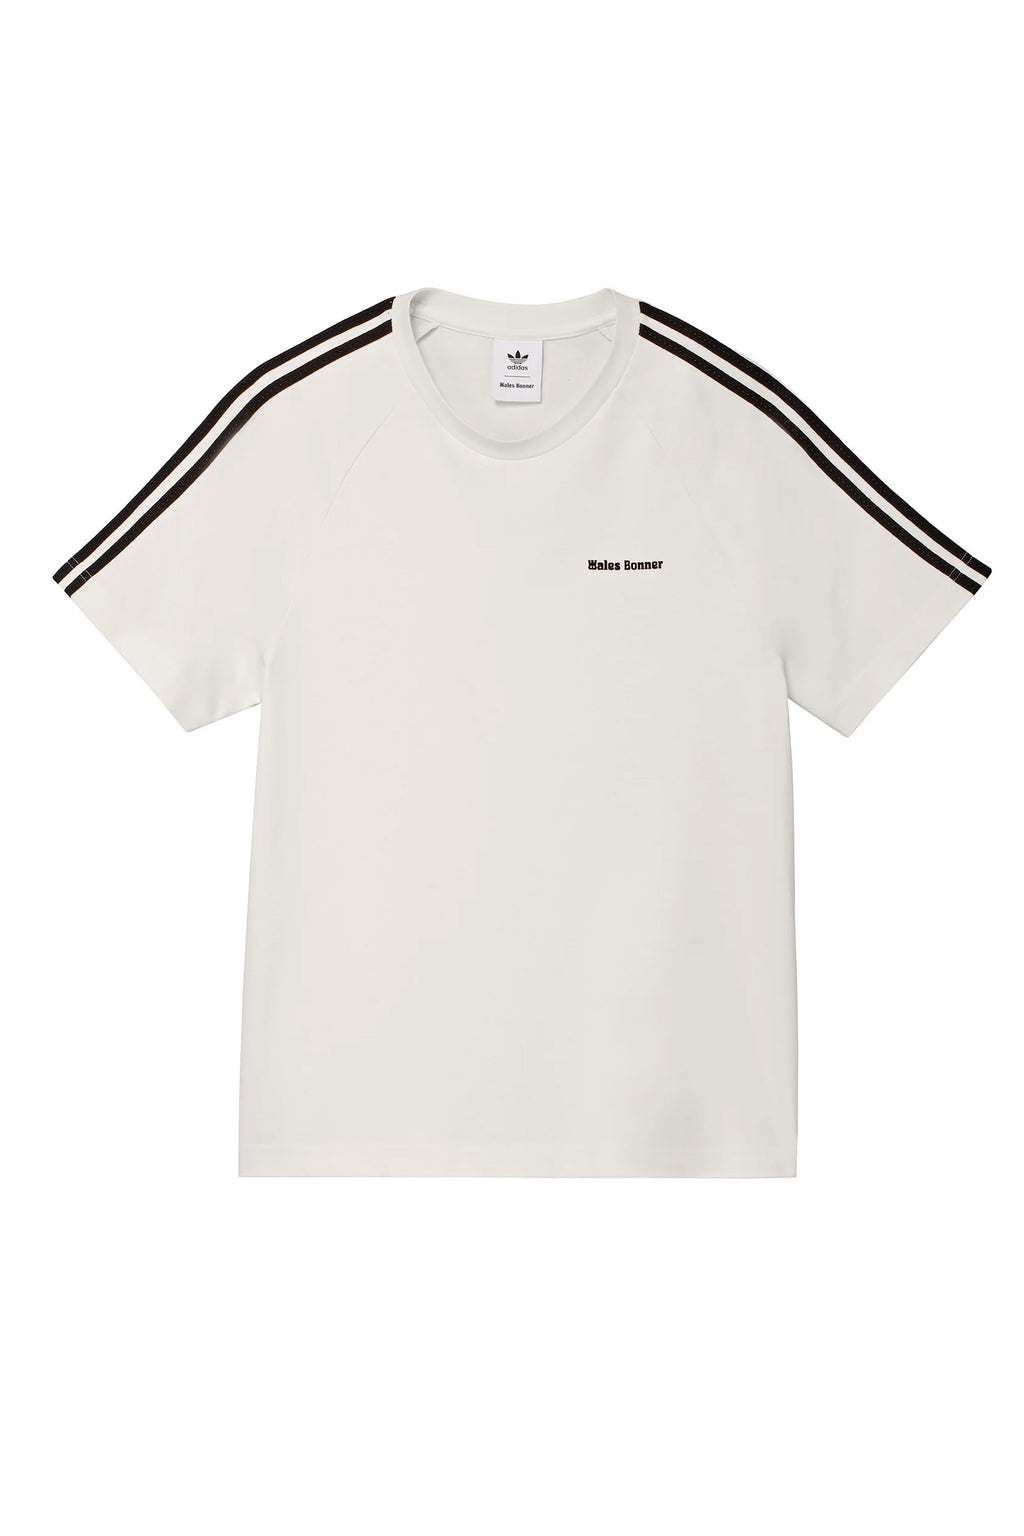 ADIDAS ORIGINALS BY FW23 S/S WHT BONNER NUBIAN - WALES / WB TEE